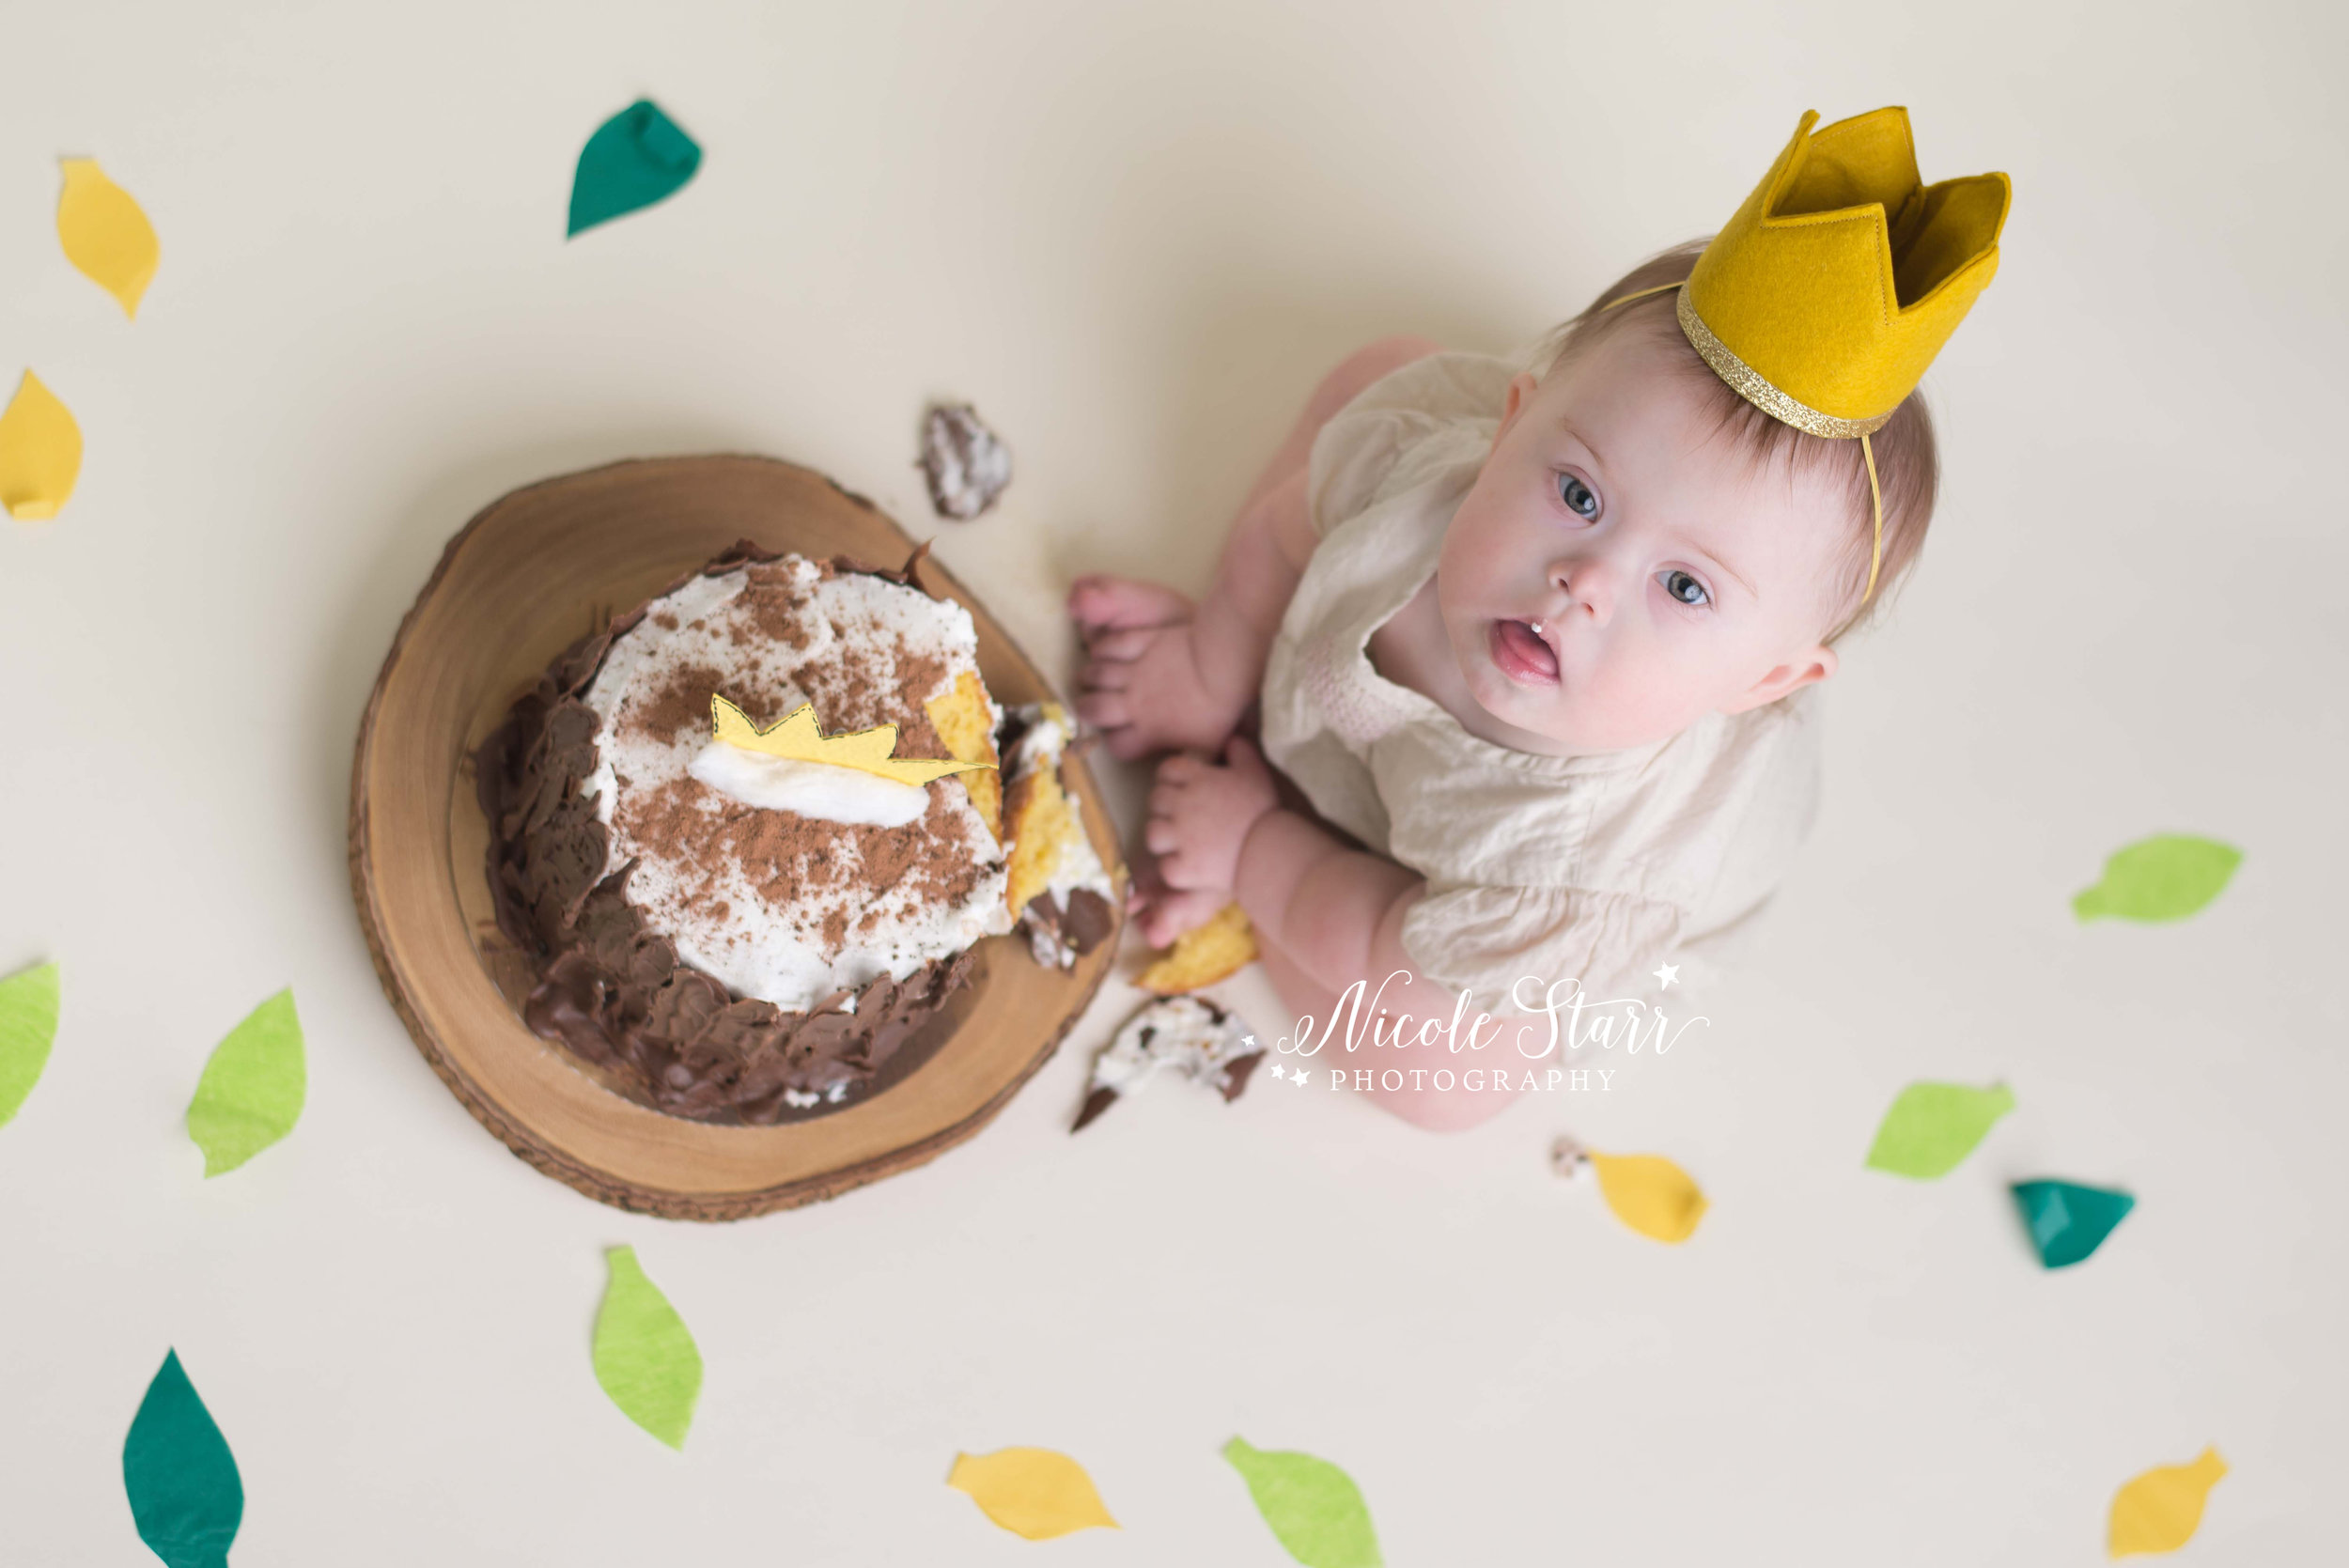 where the wild things are cake smash nicole starr photography.jpg